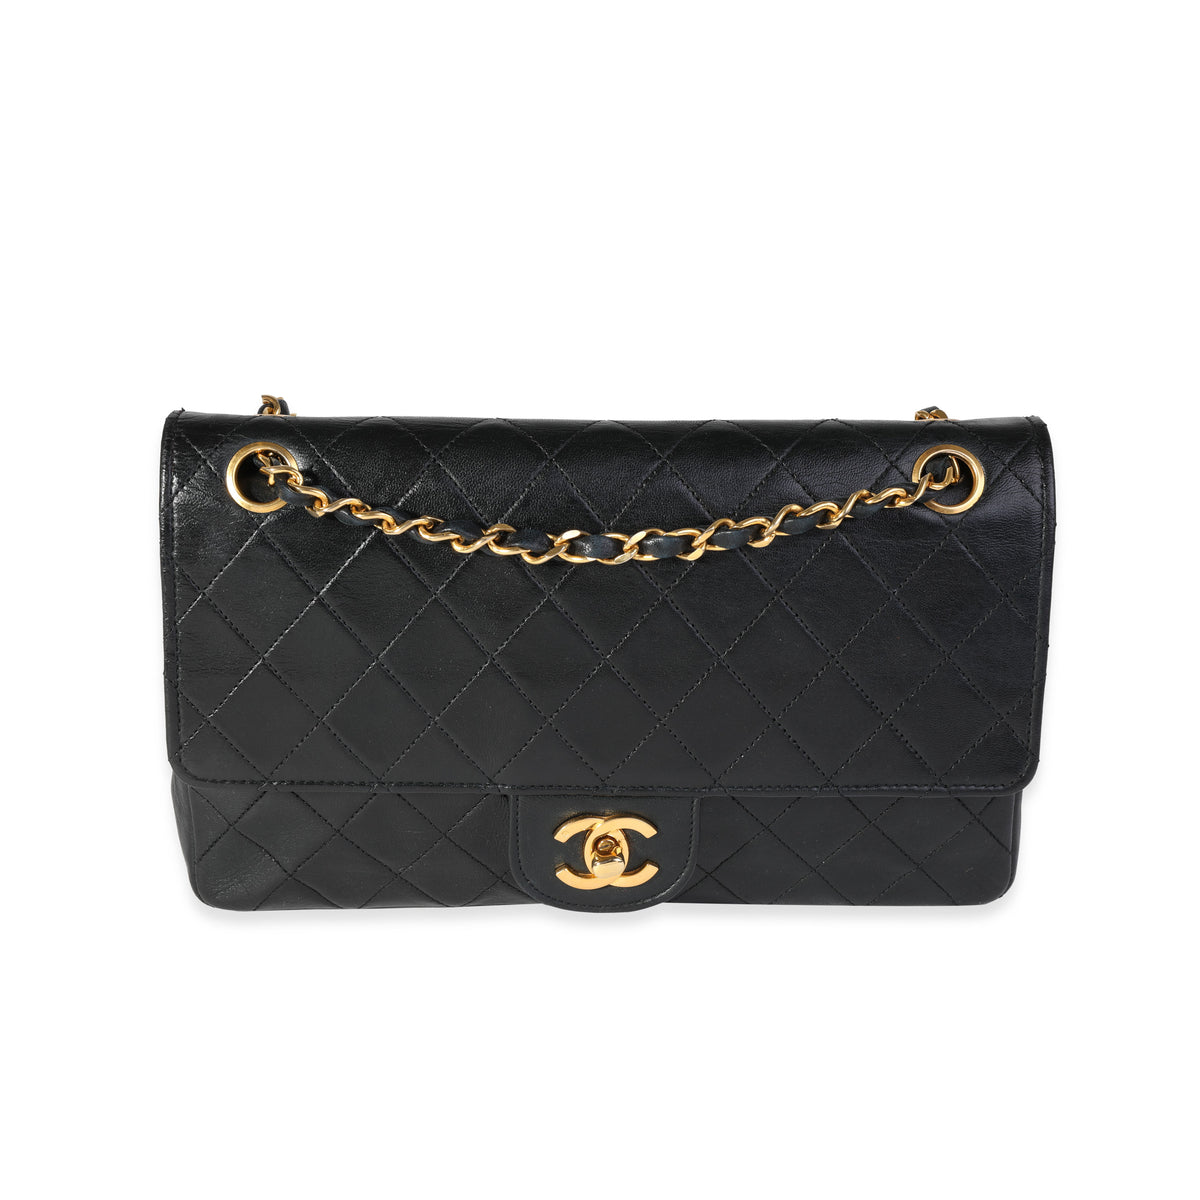 Chanel Vintage Black Quilted Lambskin Medium Double Flap Bag